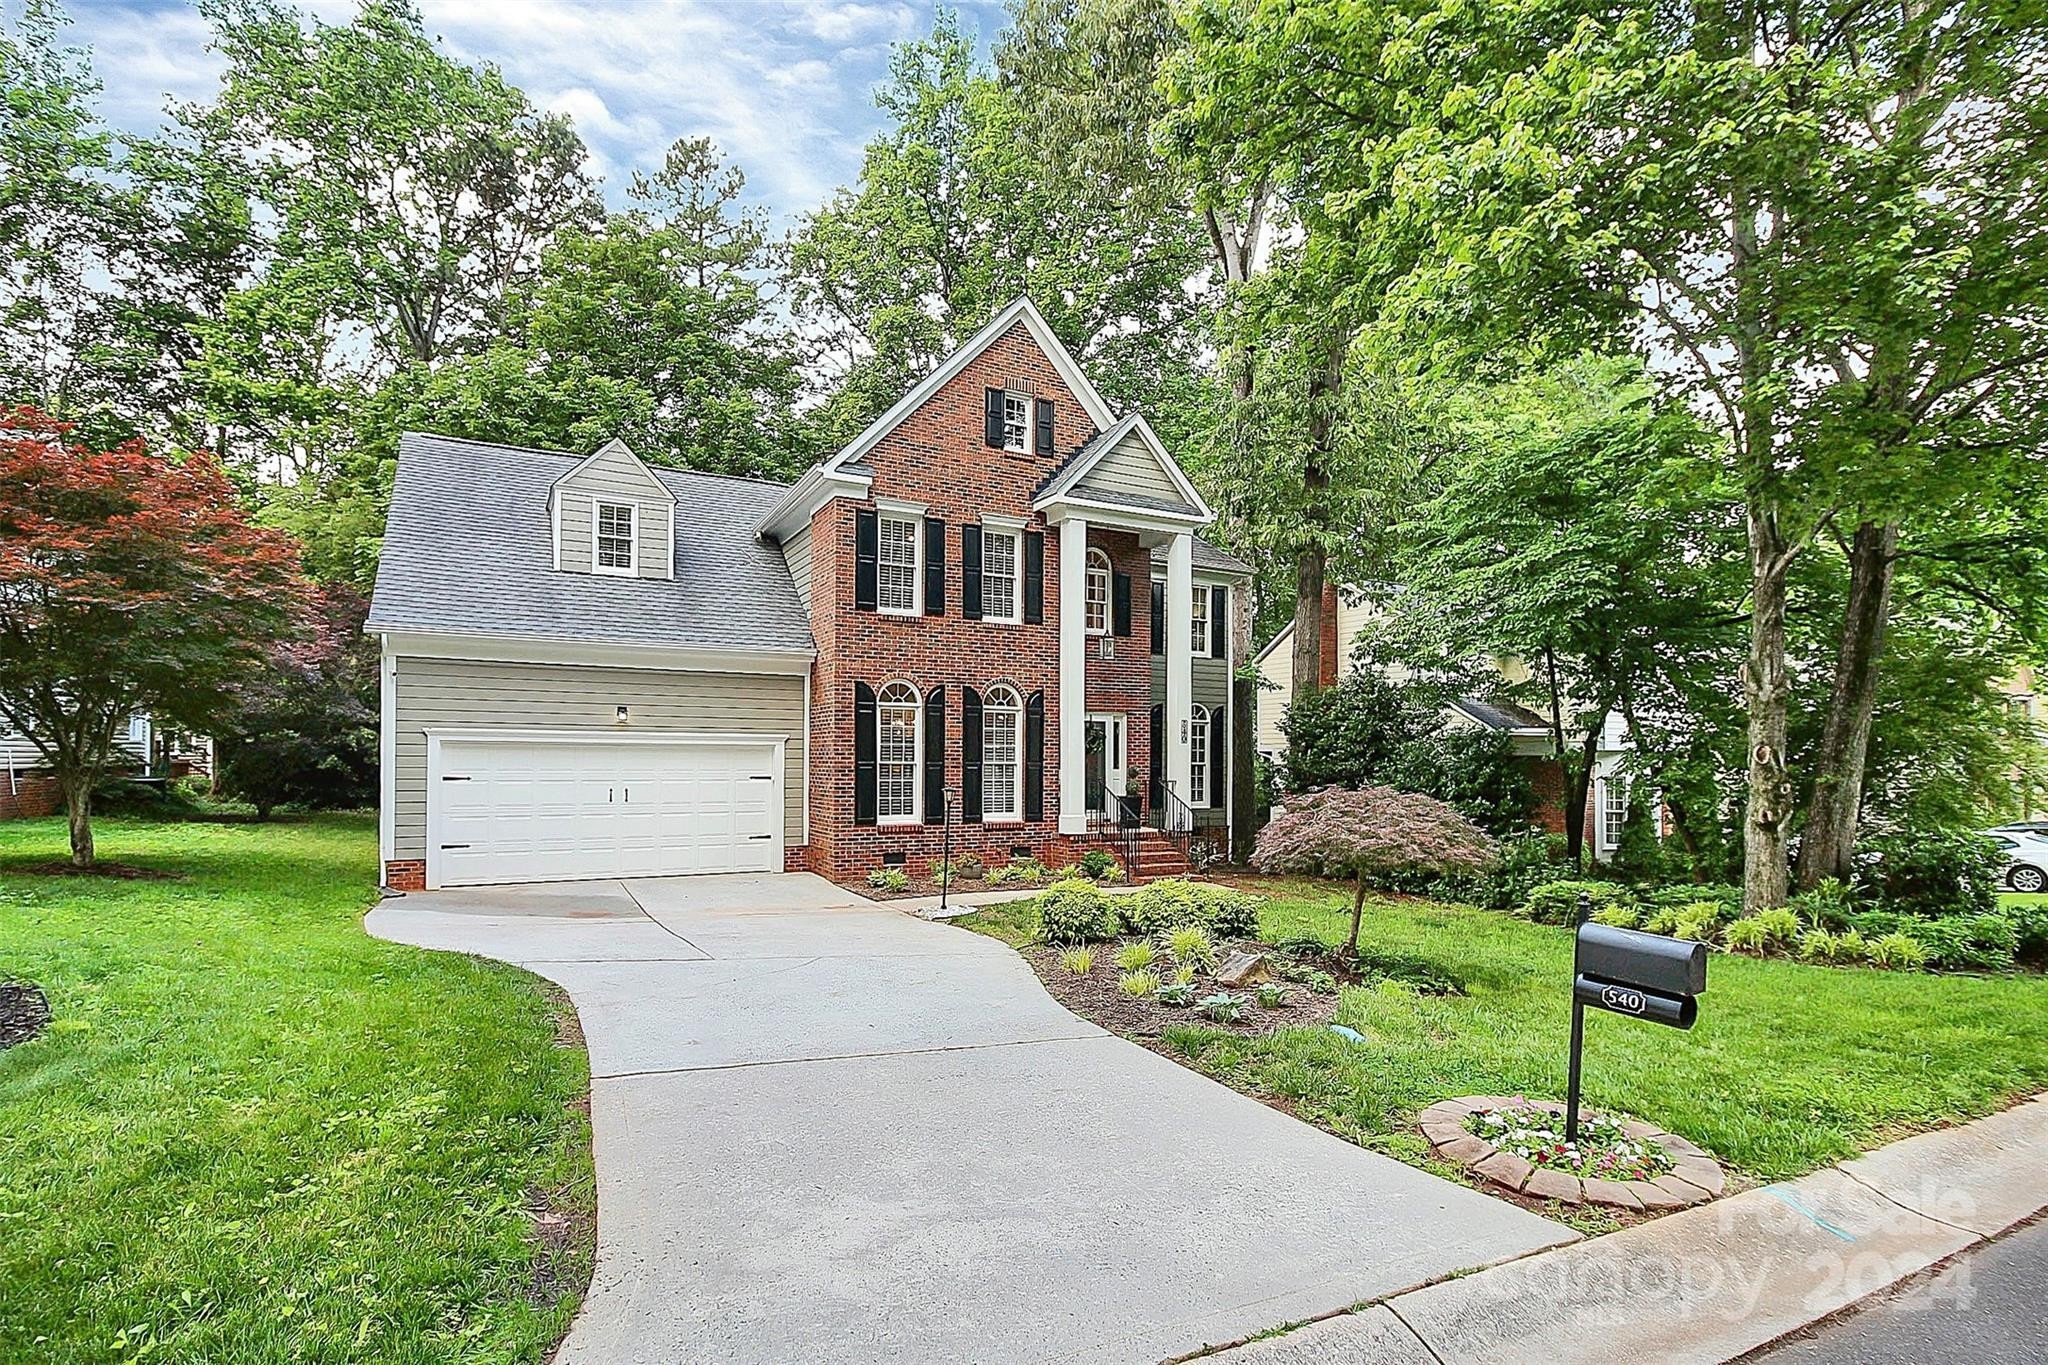 2. 540 Tysons Forest Drive